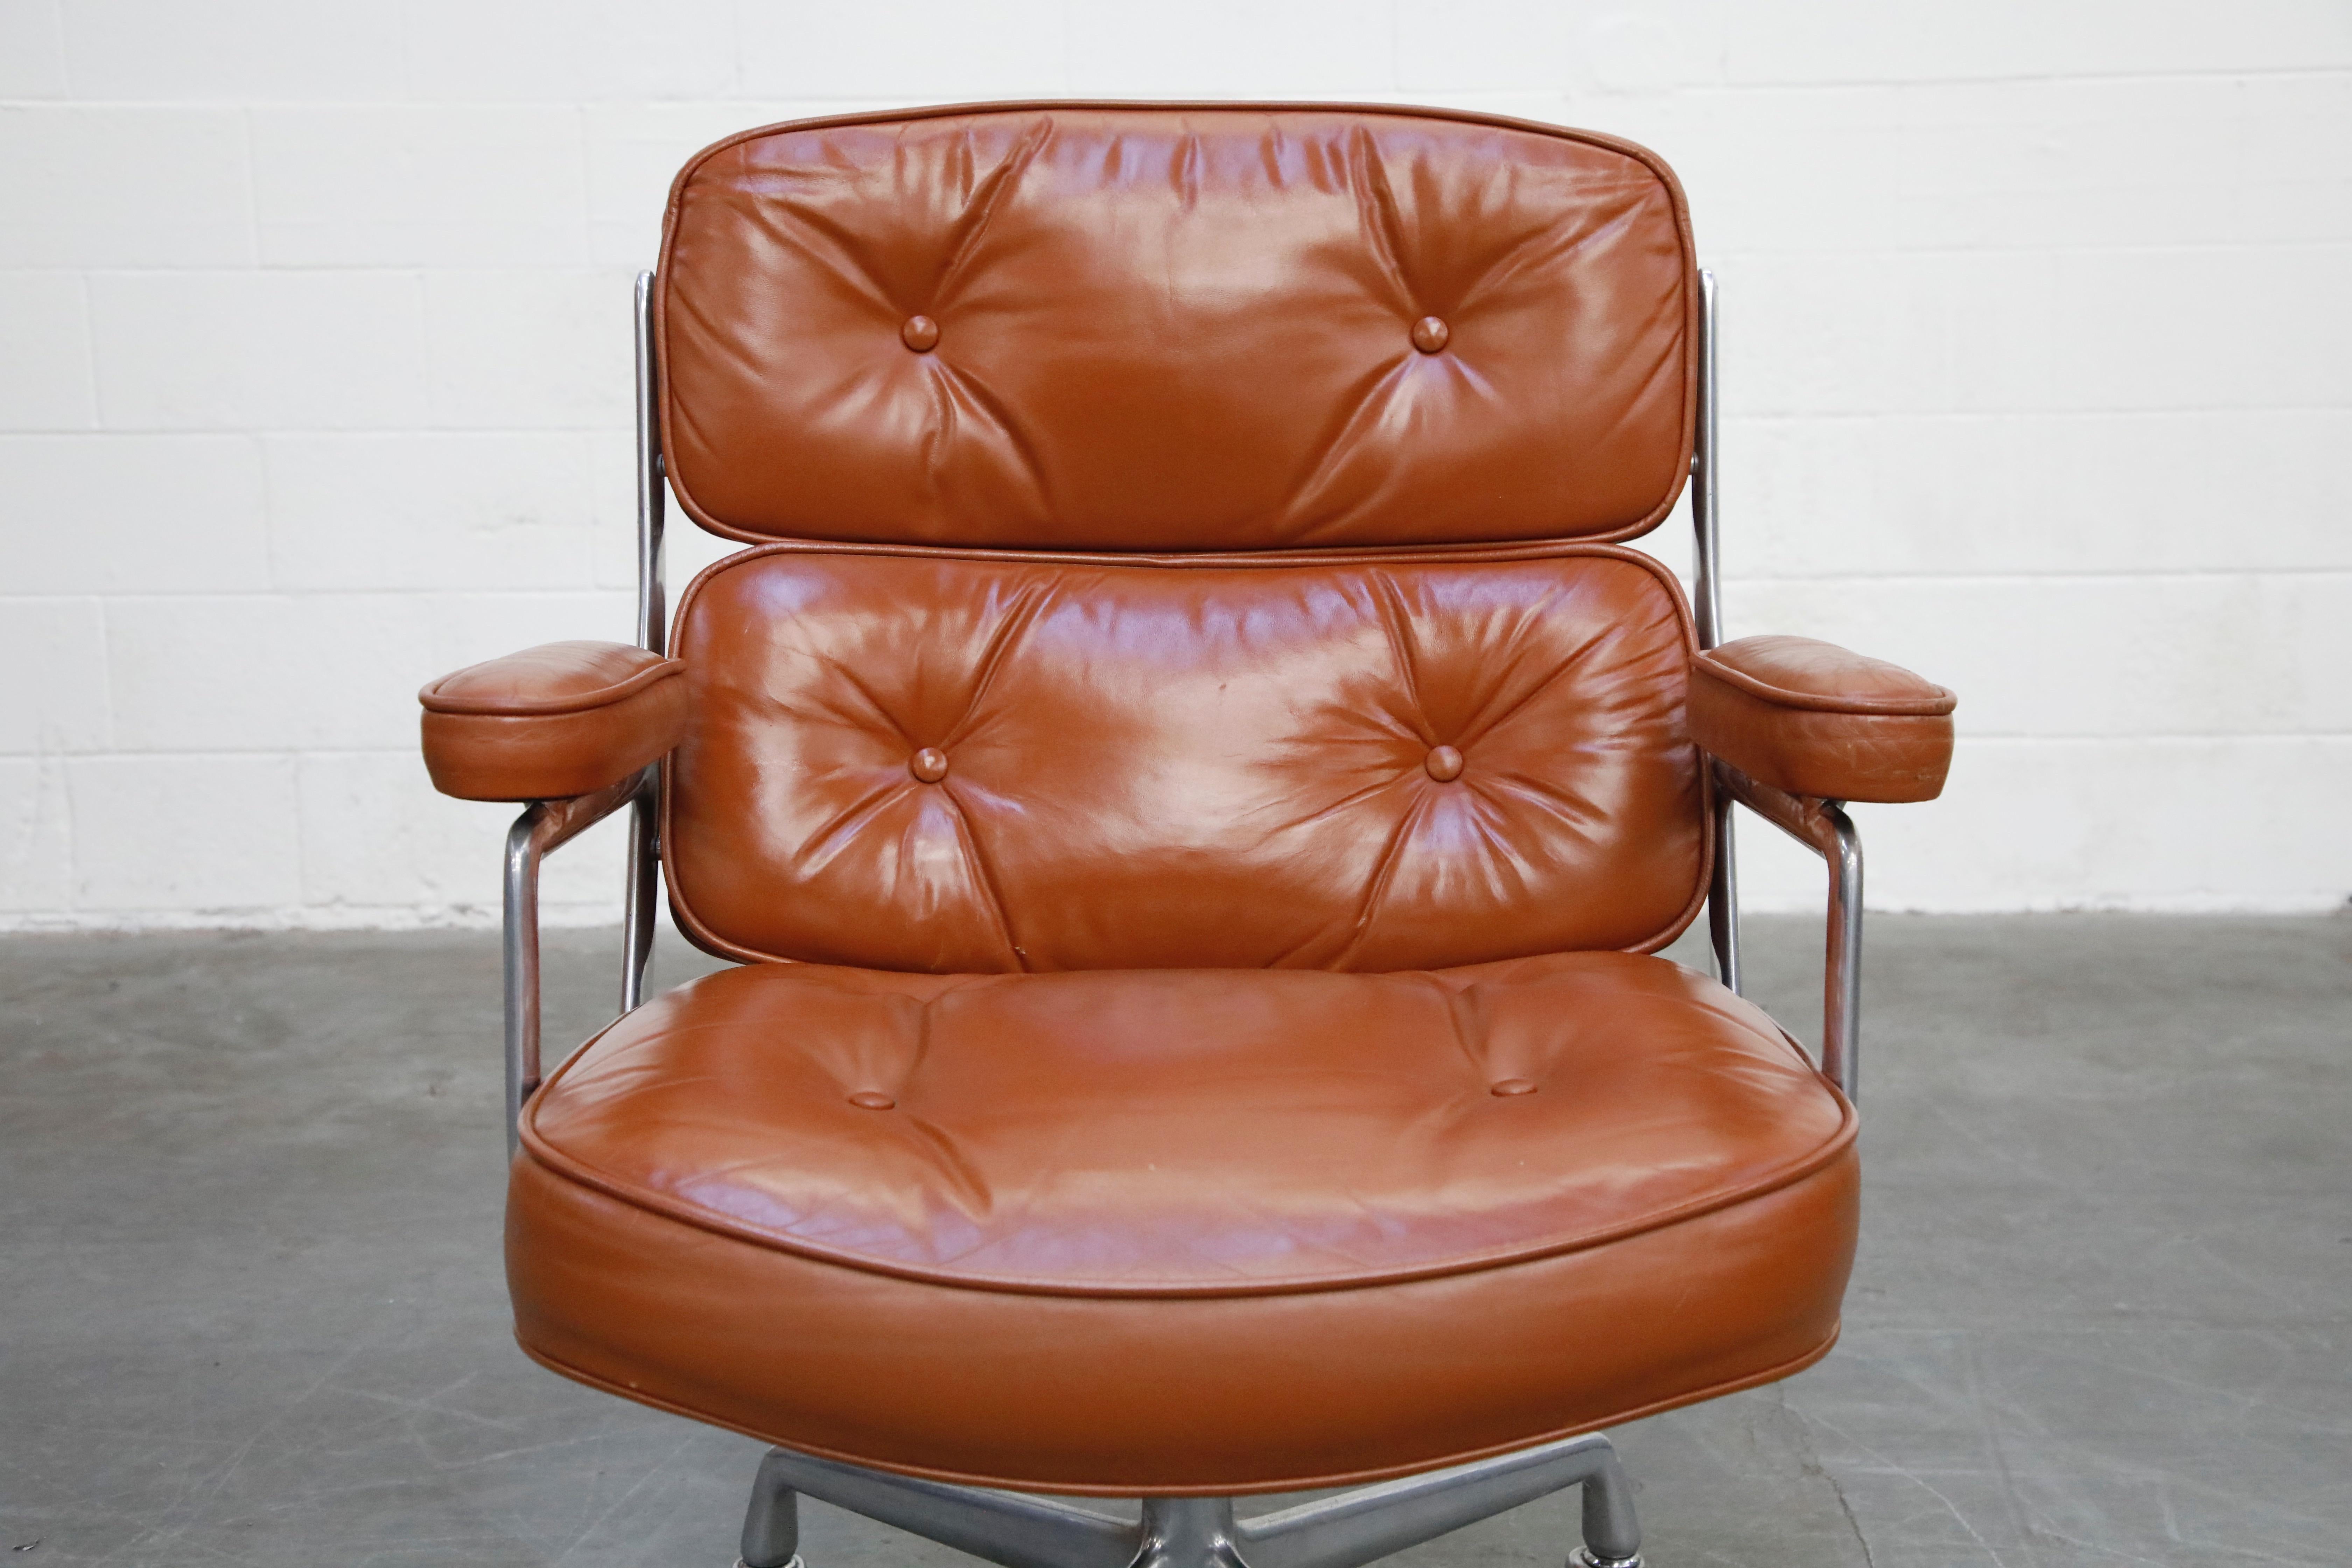 Aluminum 'Time Life' Executive Chairs by Charles Eames for Herman Miller, 1983, Signed